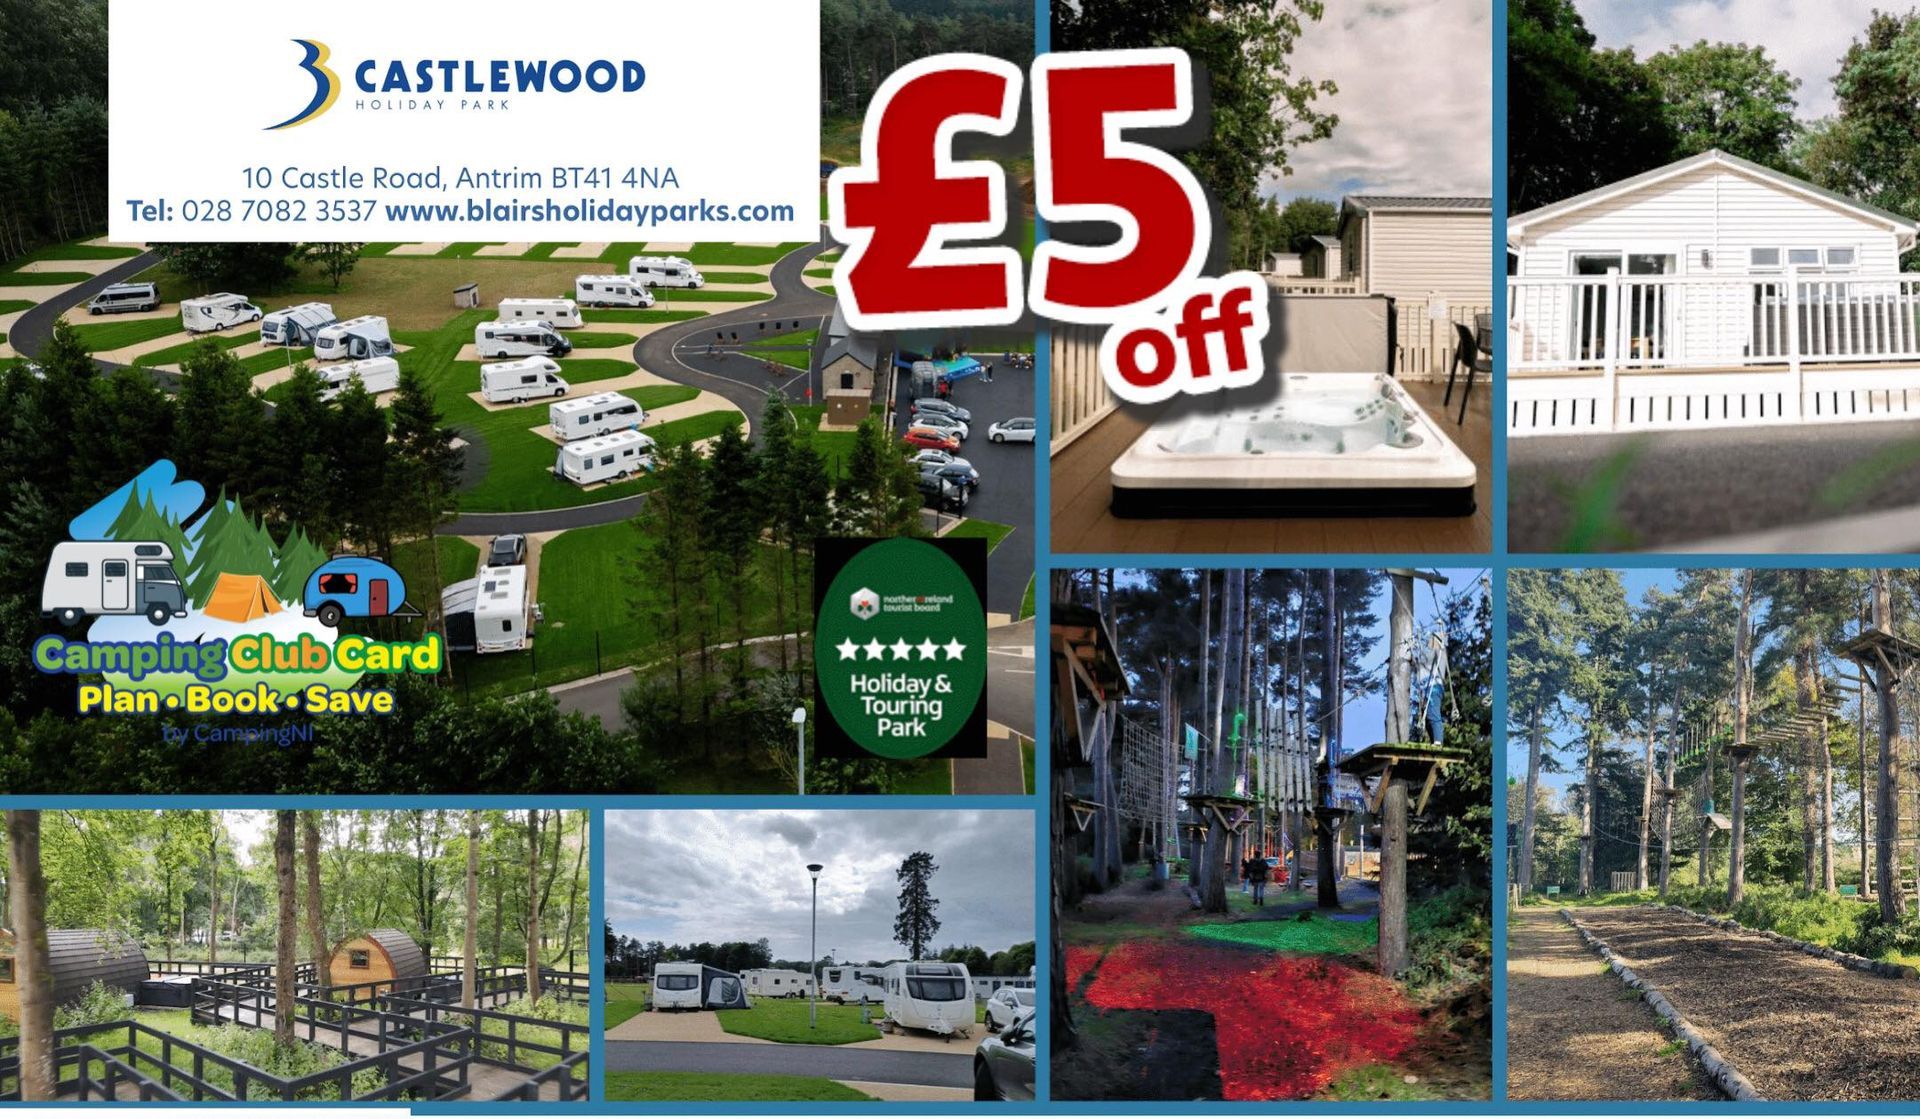 Castlewood Holiday Park Camping Club Card by CampingNI members discount